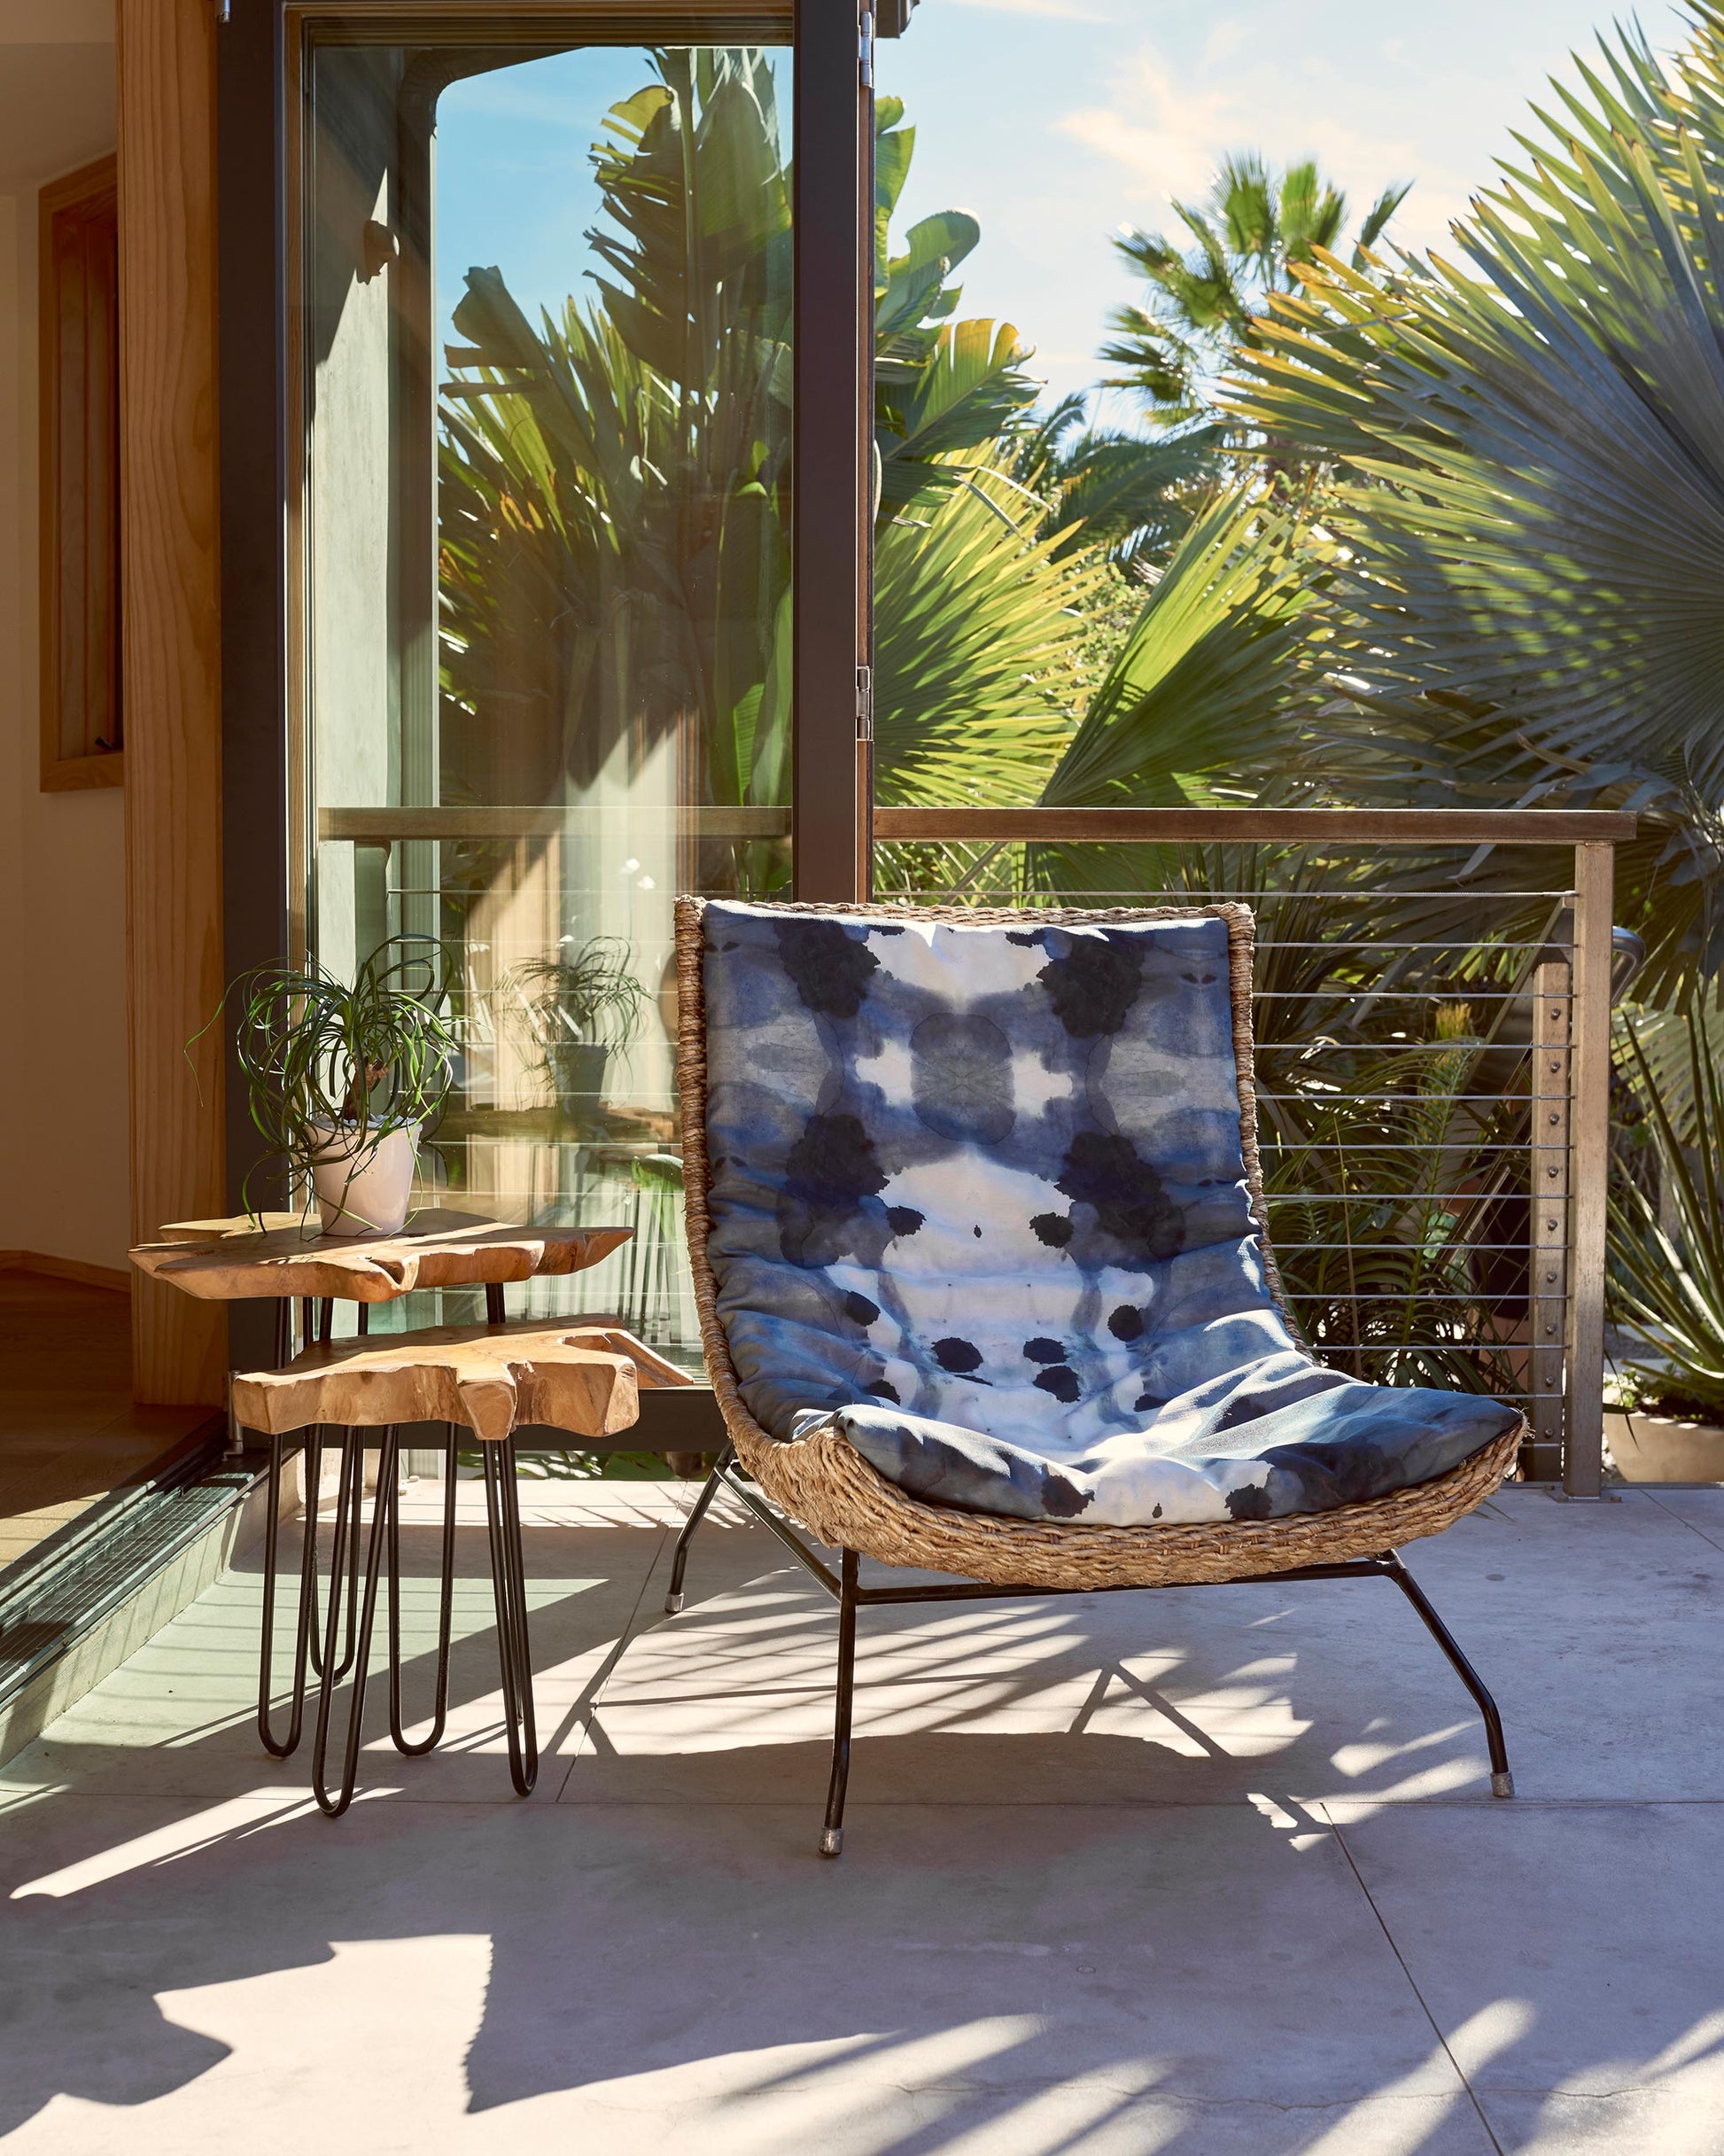 A luxurious Dynasty Performance Fabric Indigo lounge chair on a Tuscany patio surrounded by palm trees